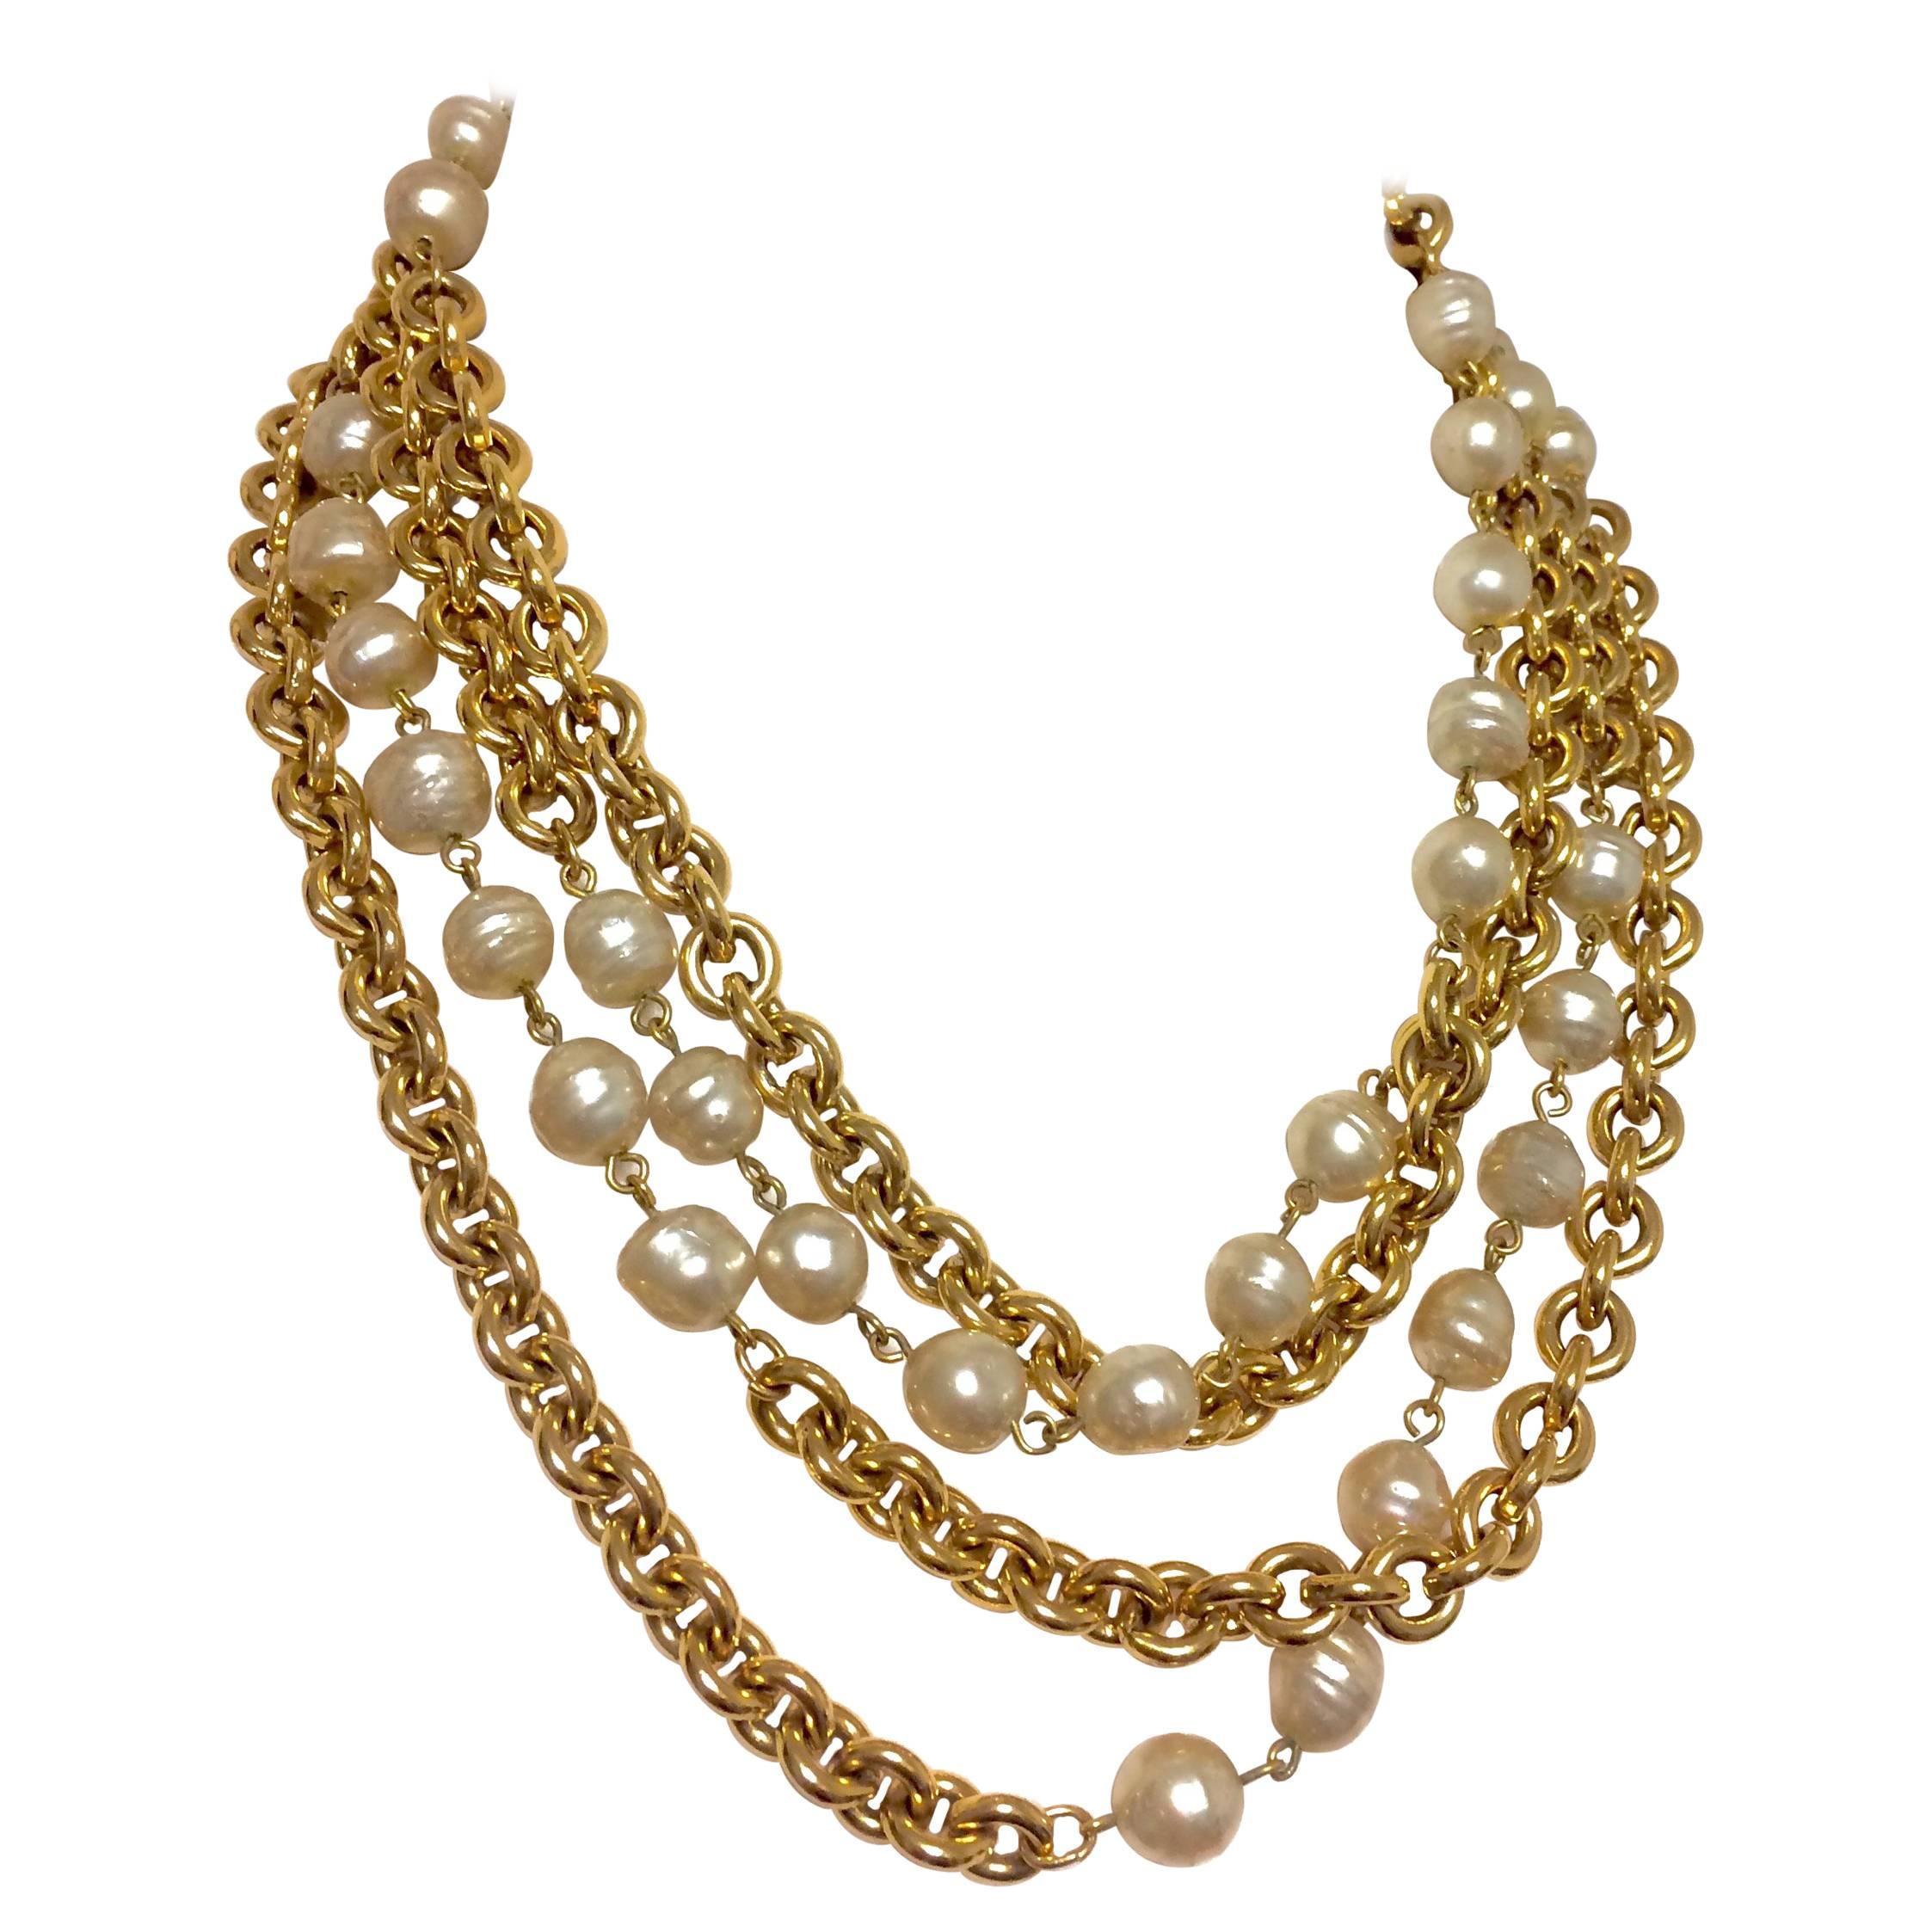  Vintage CHANEL double layer long chain necklace with baroque faux pearls.